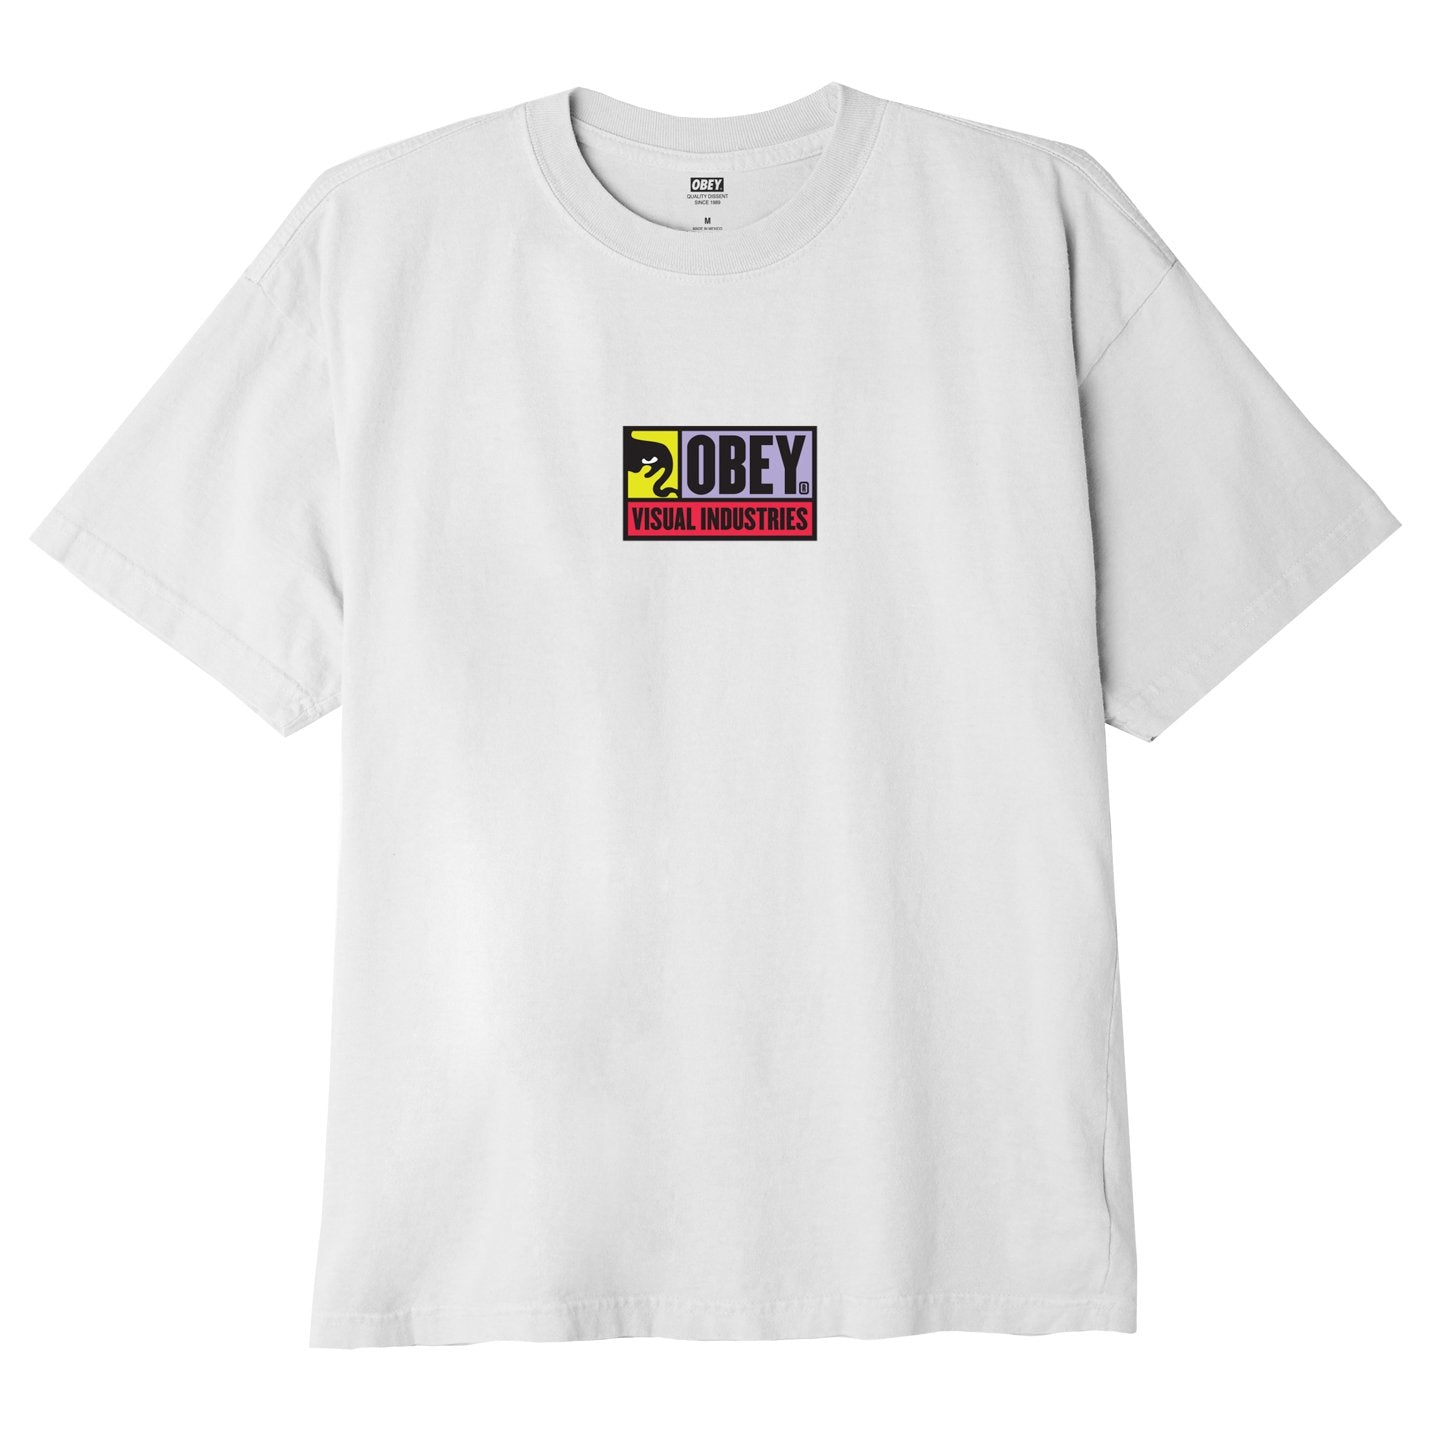 OBEY Visual Industries T-Shirt